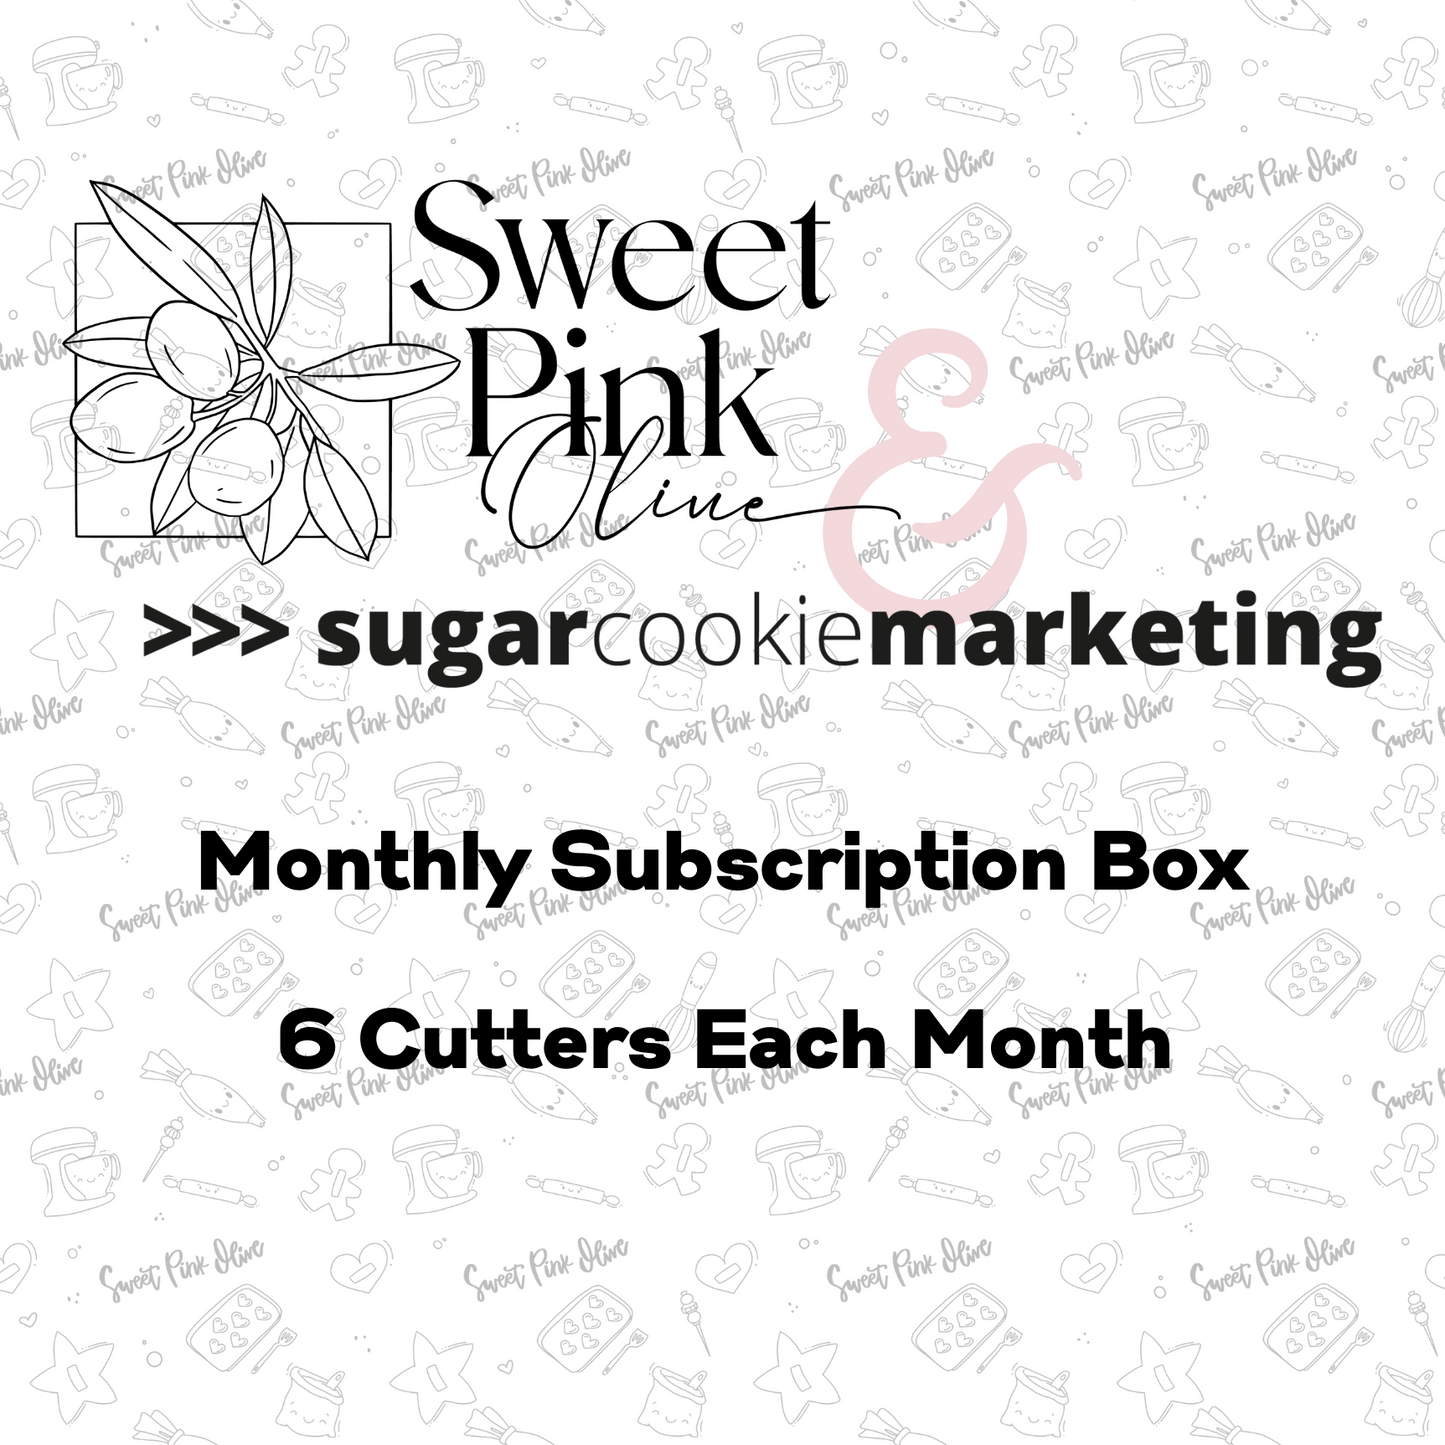 Sweet Pink Olive and Sugar Cookie Marketing Monthly Subscription Box - Starting with August